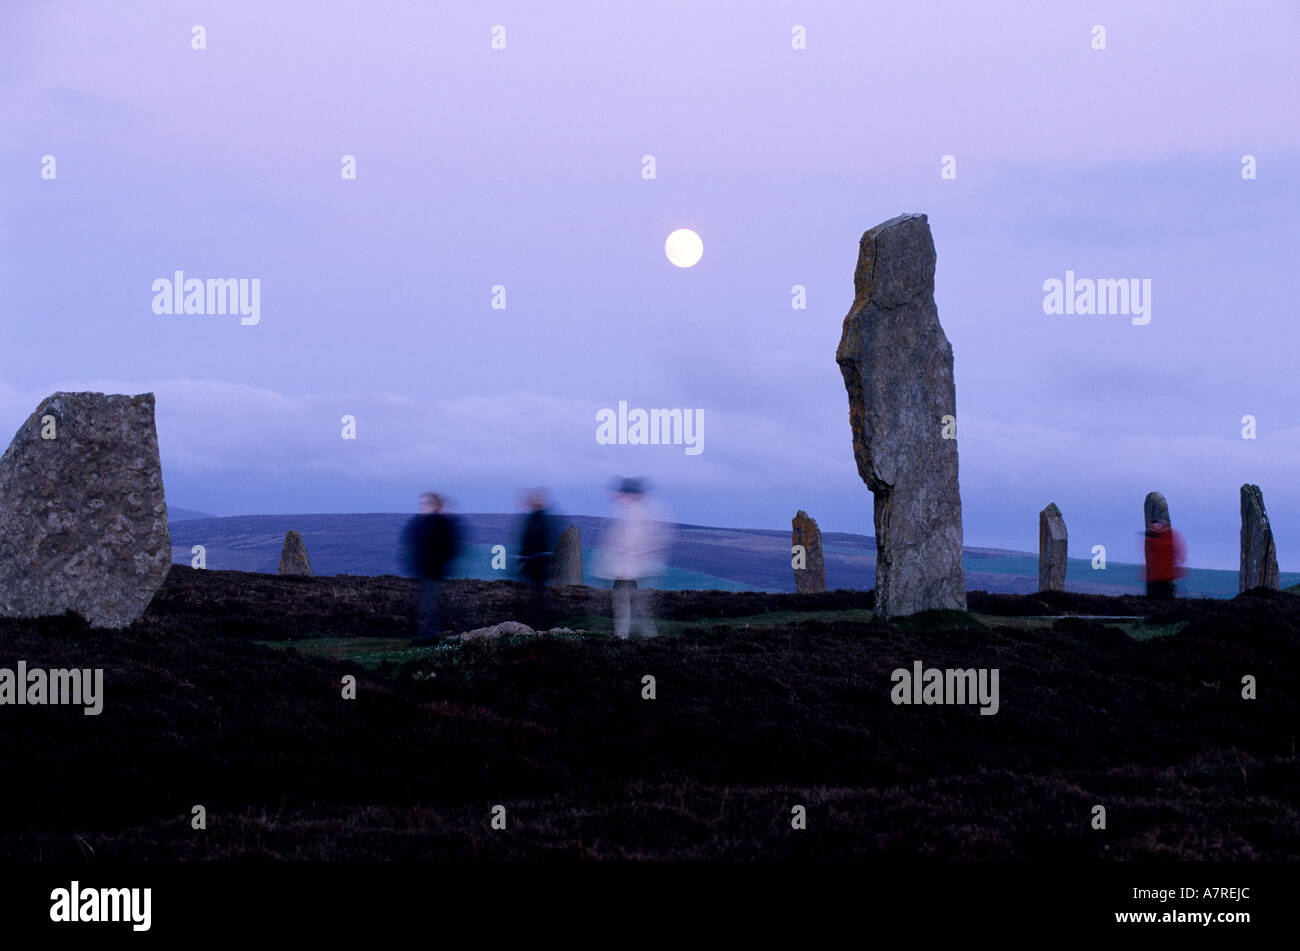 United Kingdom, Scotland, Orkney Islands, Mainland, beside the Loch of Stenness, standing stones from the Ring of Brogar Stock Photo